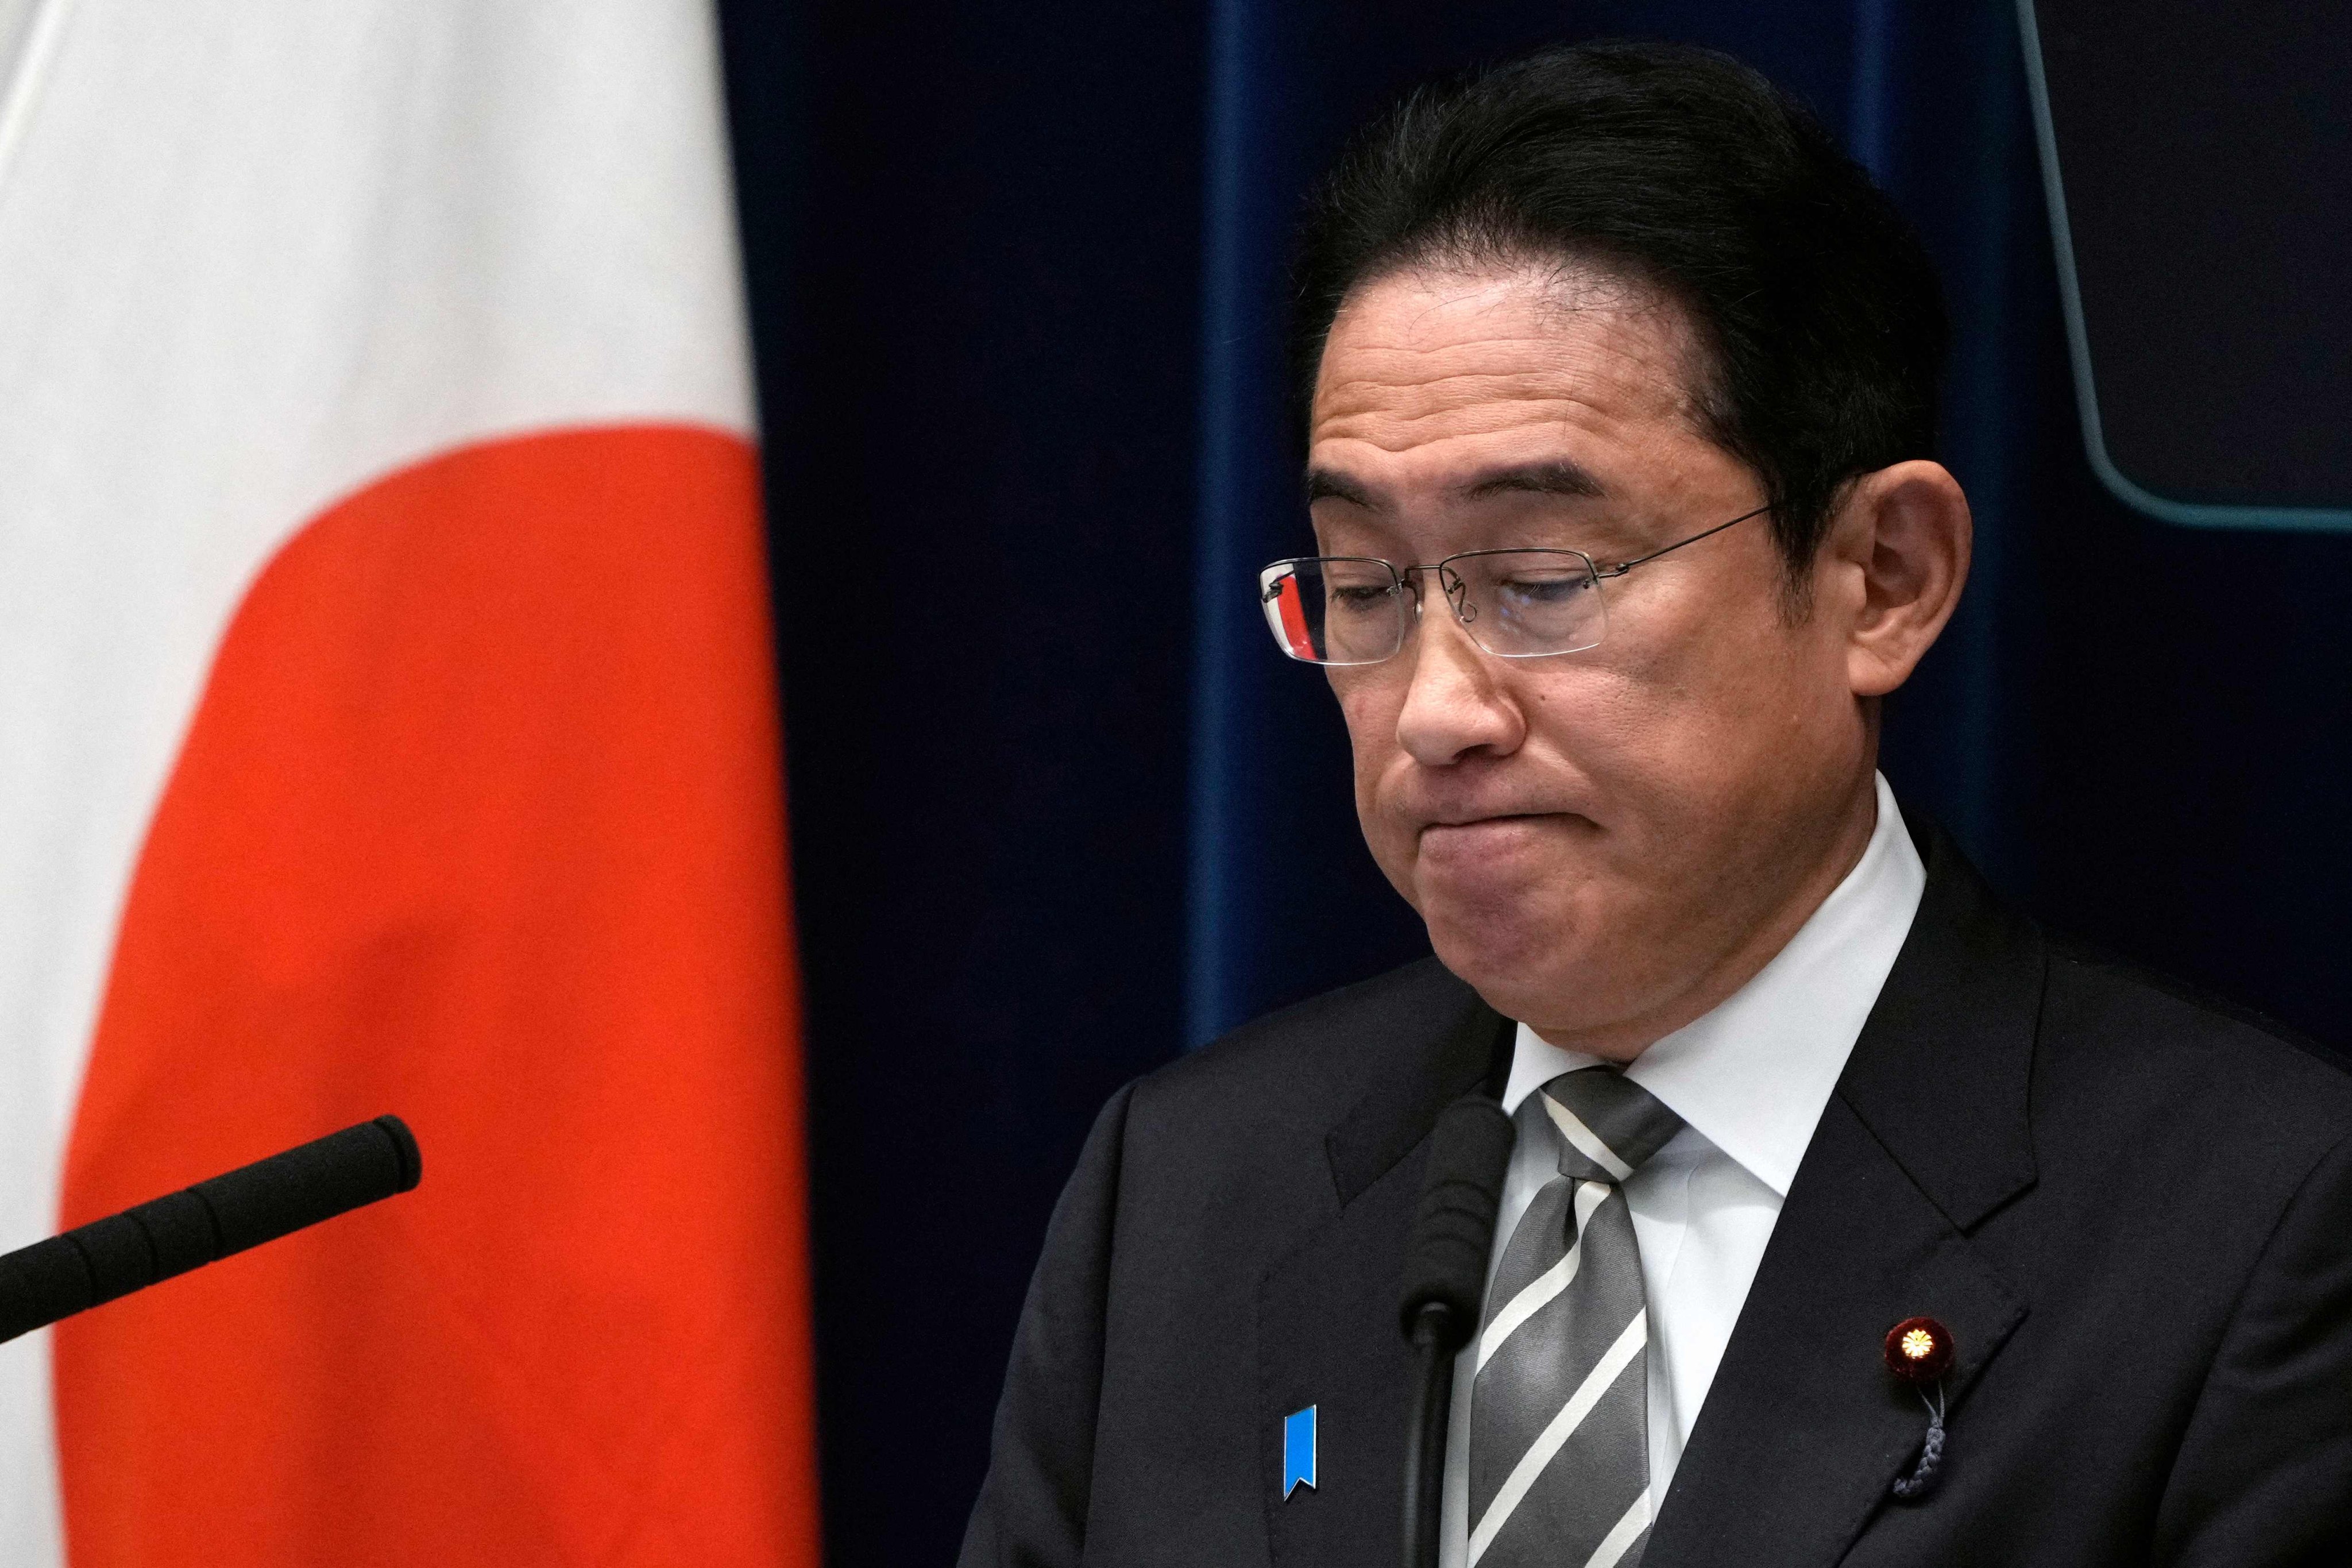 Japan’s Prime Minister Fumio Kishida reacts during a news conference at the Prime Minister’s Office in Tokyo on December 13. Kishida said he would tackle a major funding scandal within his party “like a ball of fire”. Photo: AFP